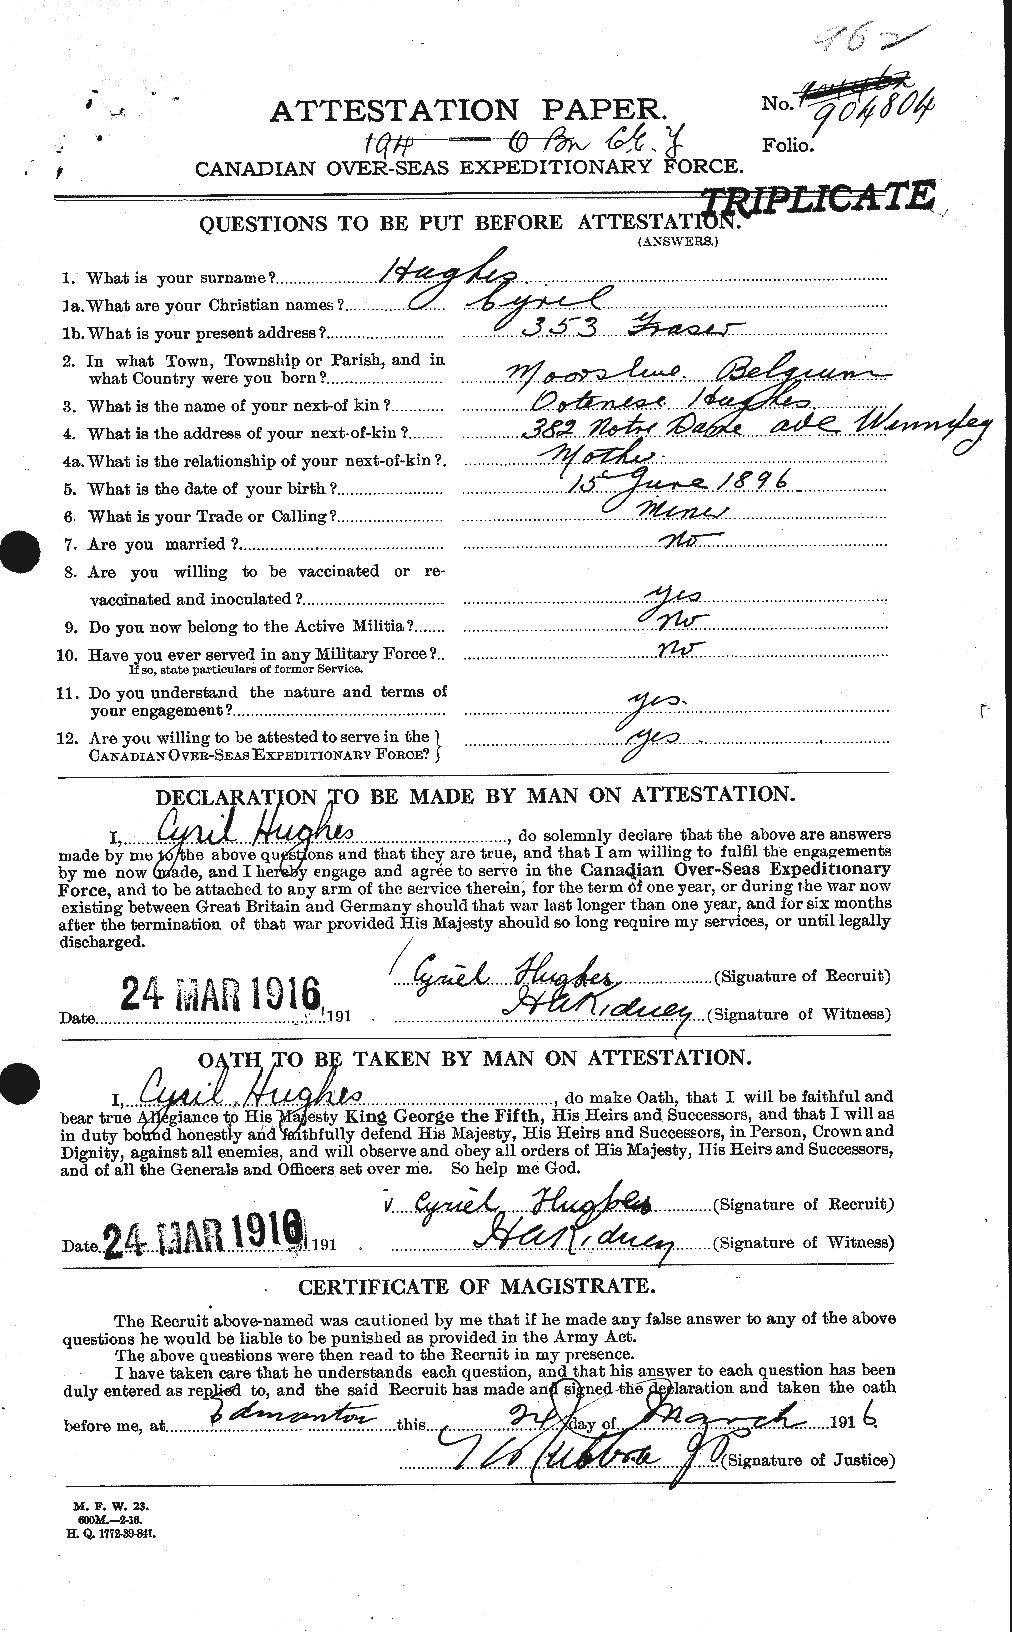 Personnel Records of the First World War - CEF 402634a